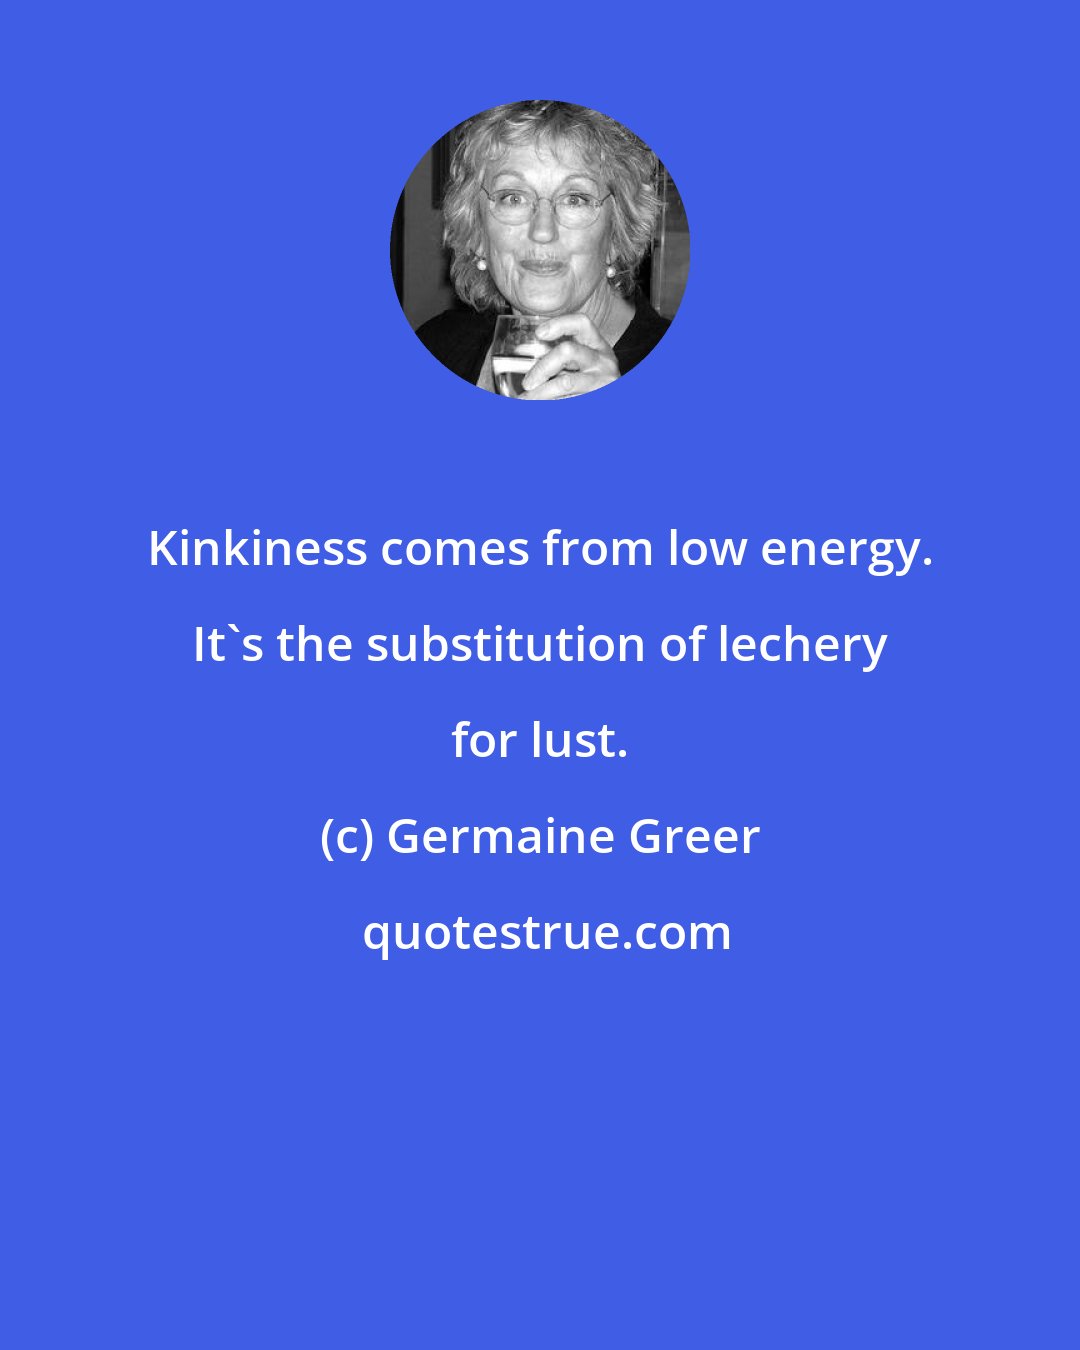 Germaine Greer: Kinkiness comes from low energy. It's the substitution of lechery for lust.